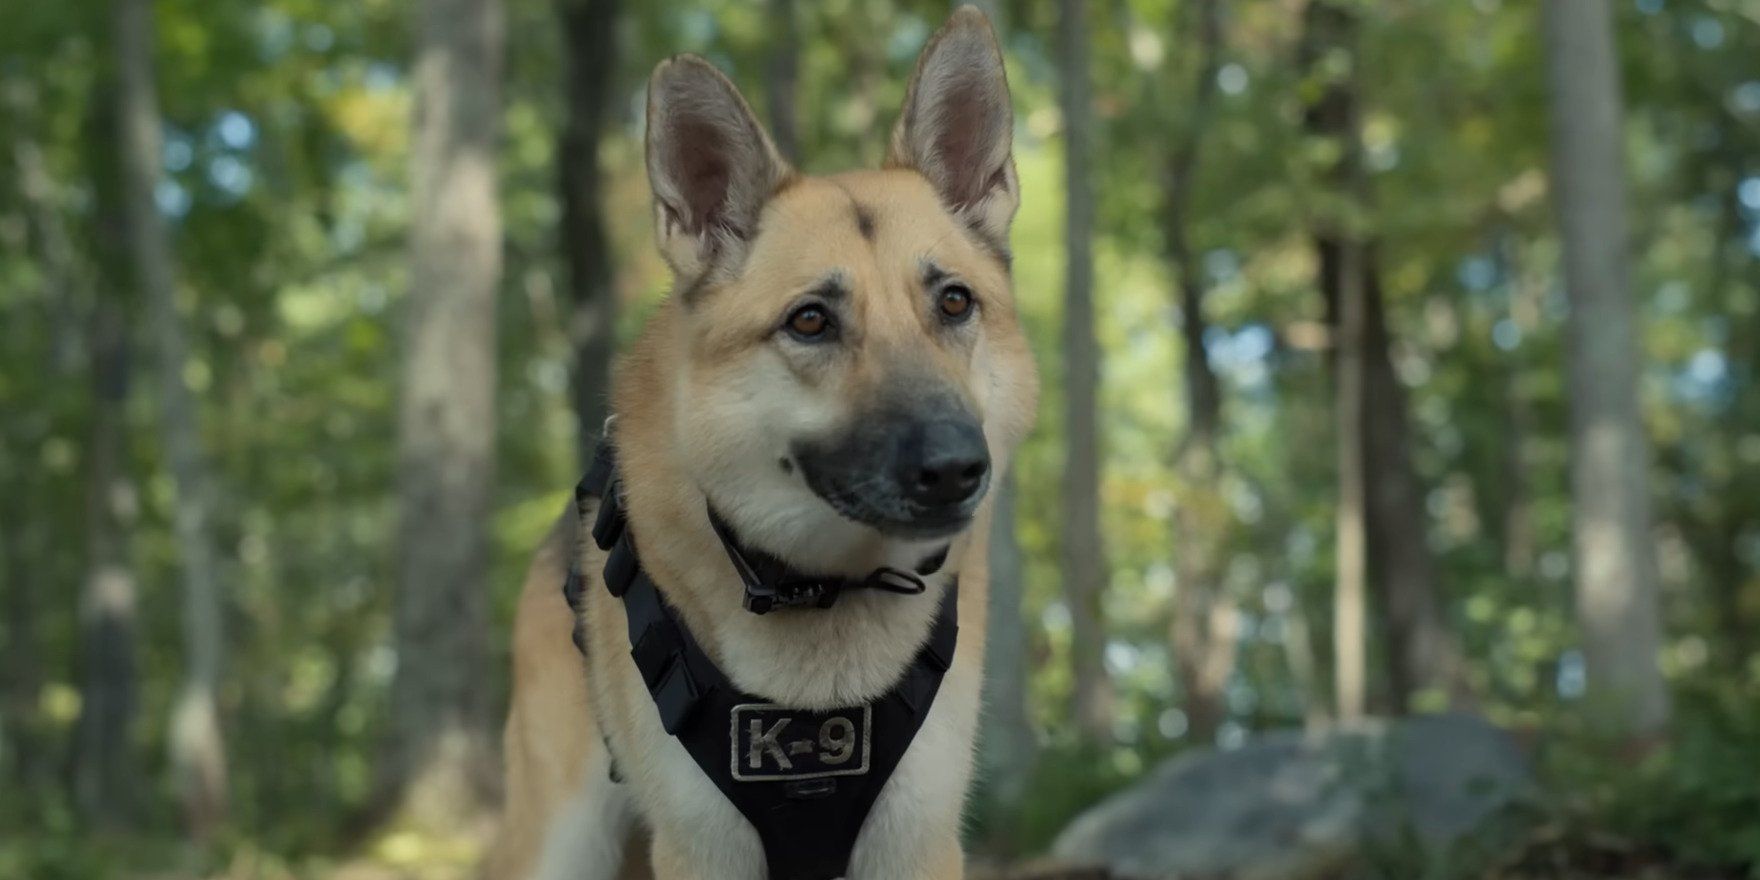 A still from the film Strays featuring Rolf, the K-9 dog voiced by Rob Riggle